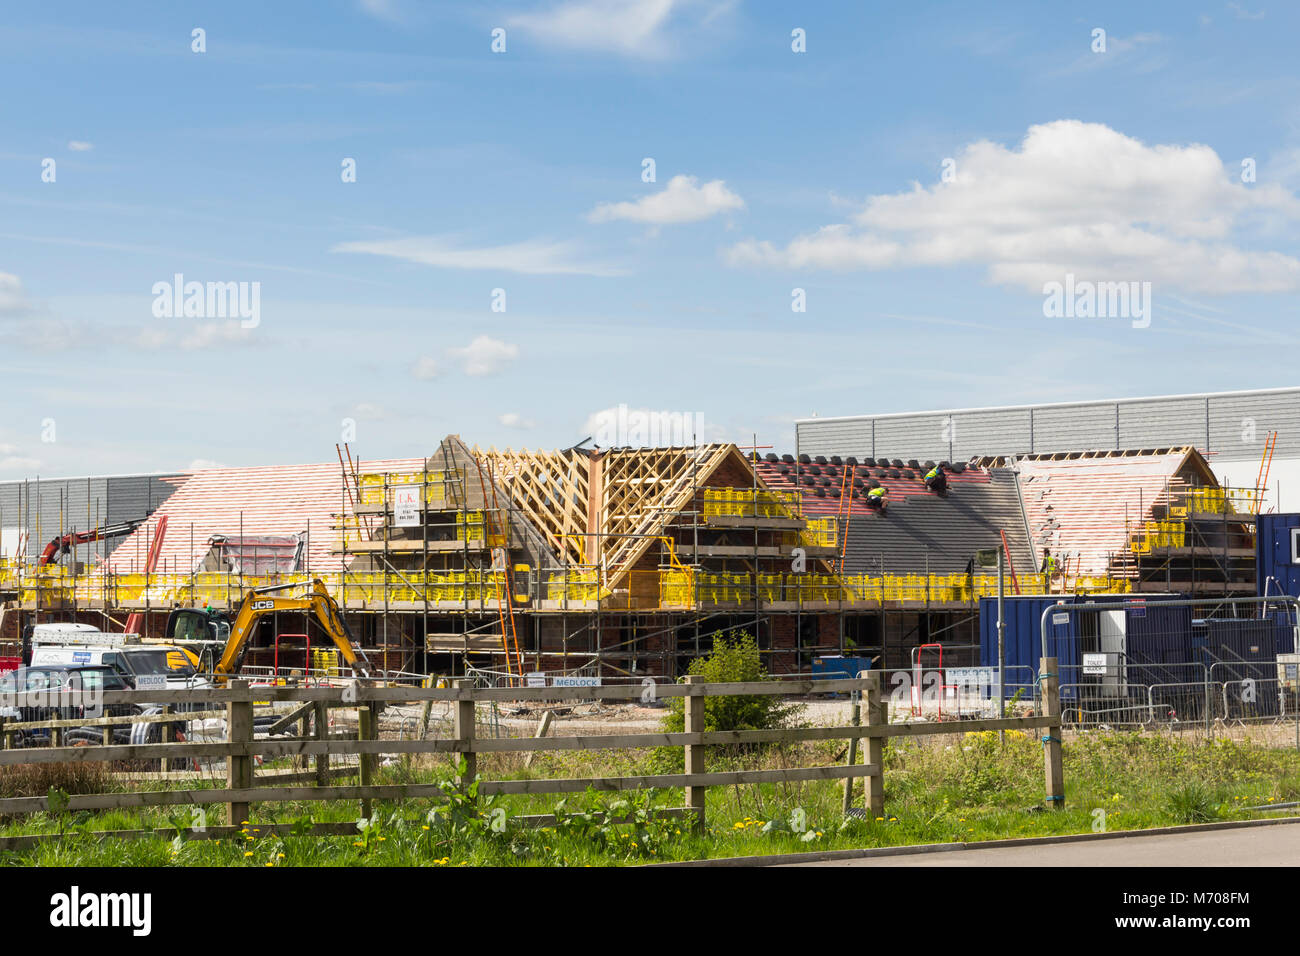 New Pine Tree Farm pub carvery restaurant being built at Logistics North, Bolton. The pub is part of the Greene King, Farmhouse Inns branded chain. Stock Photo